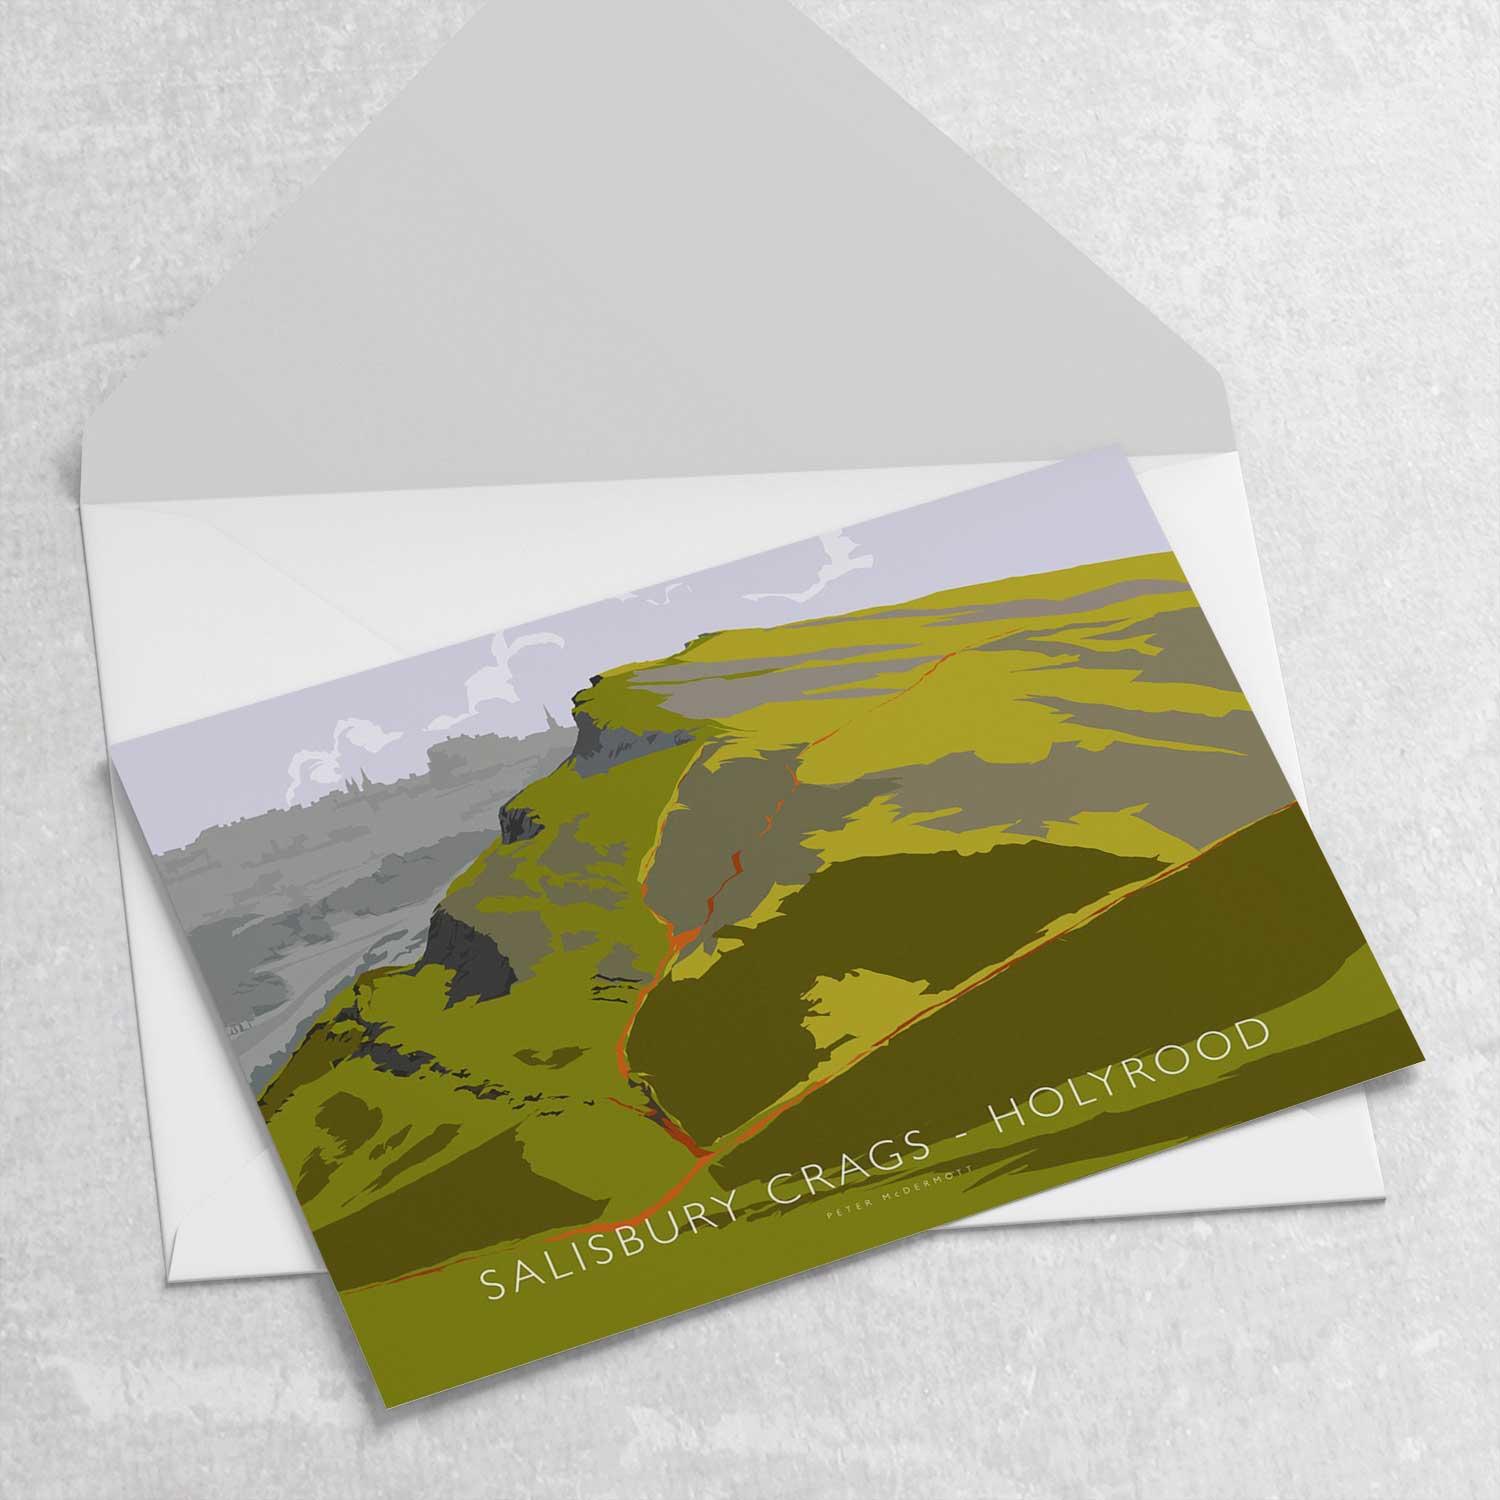 Salisbury Crags Holyrood Greeting Card from an original painting by artist Peter McDermott